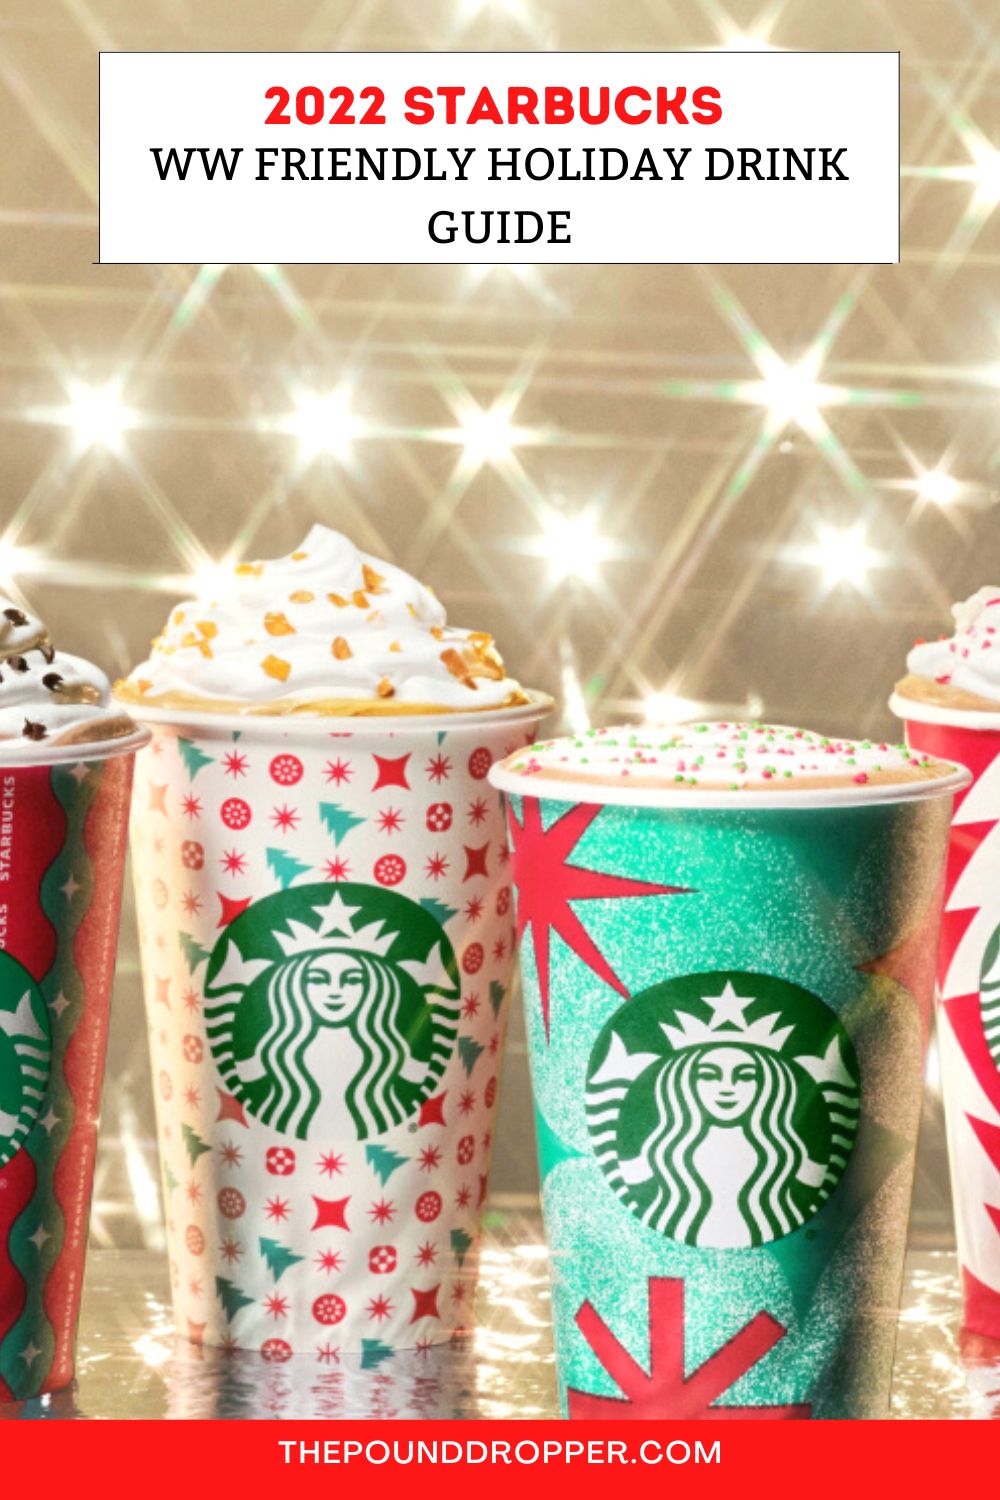 It's that time of year....Whether you’re looking for a Peppermint Mocha or Caramel Brûlée Latte, this Starbucks Holiday Drink Guide will help you find a Holiday drink that fits into your wellness plan. There are so many delicious Starbucks Holiday drinks you are sure to enjoy! via @pounddropper